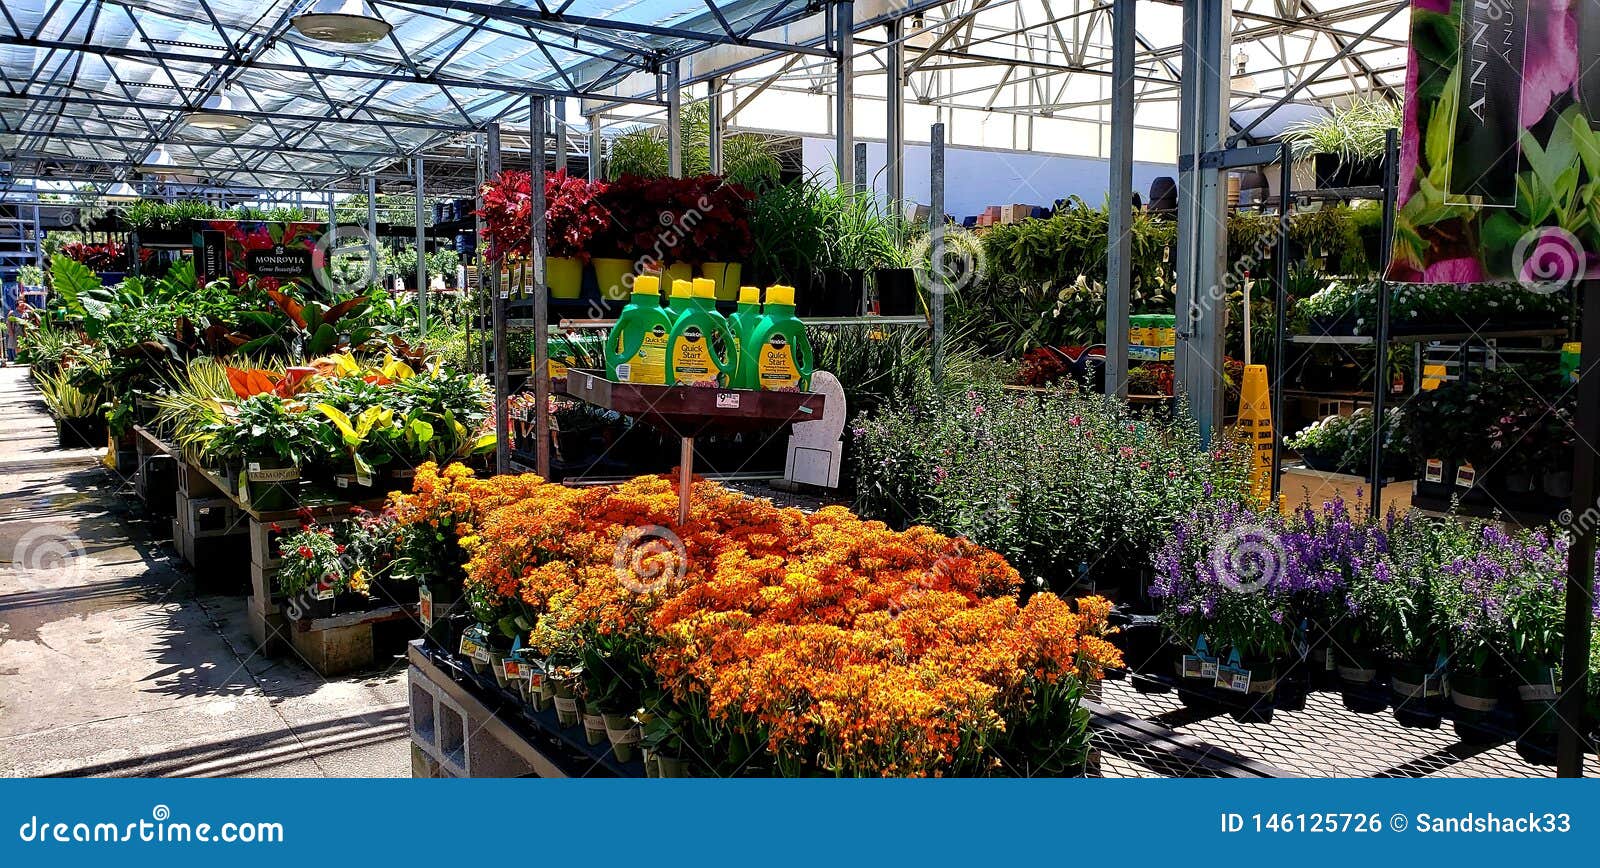 Lowe S Garden Center Editorial Photo Image Of Plants 146125726